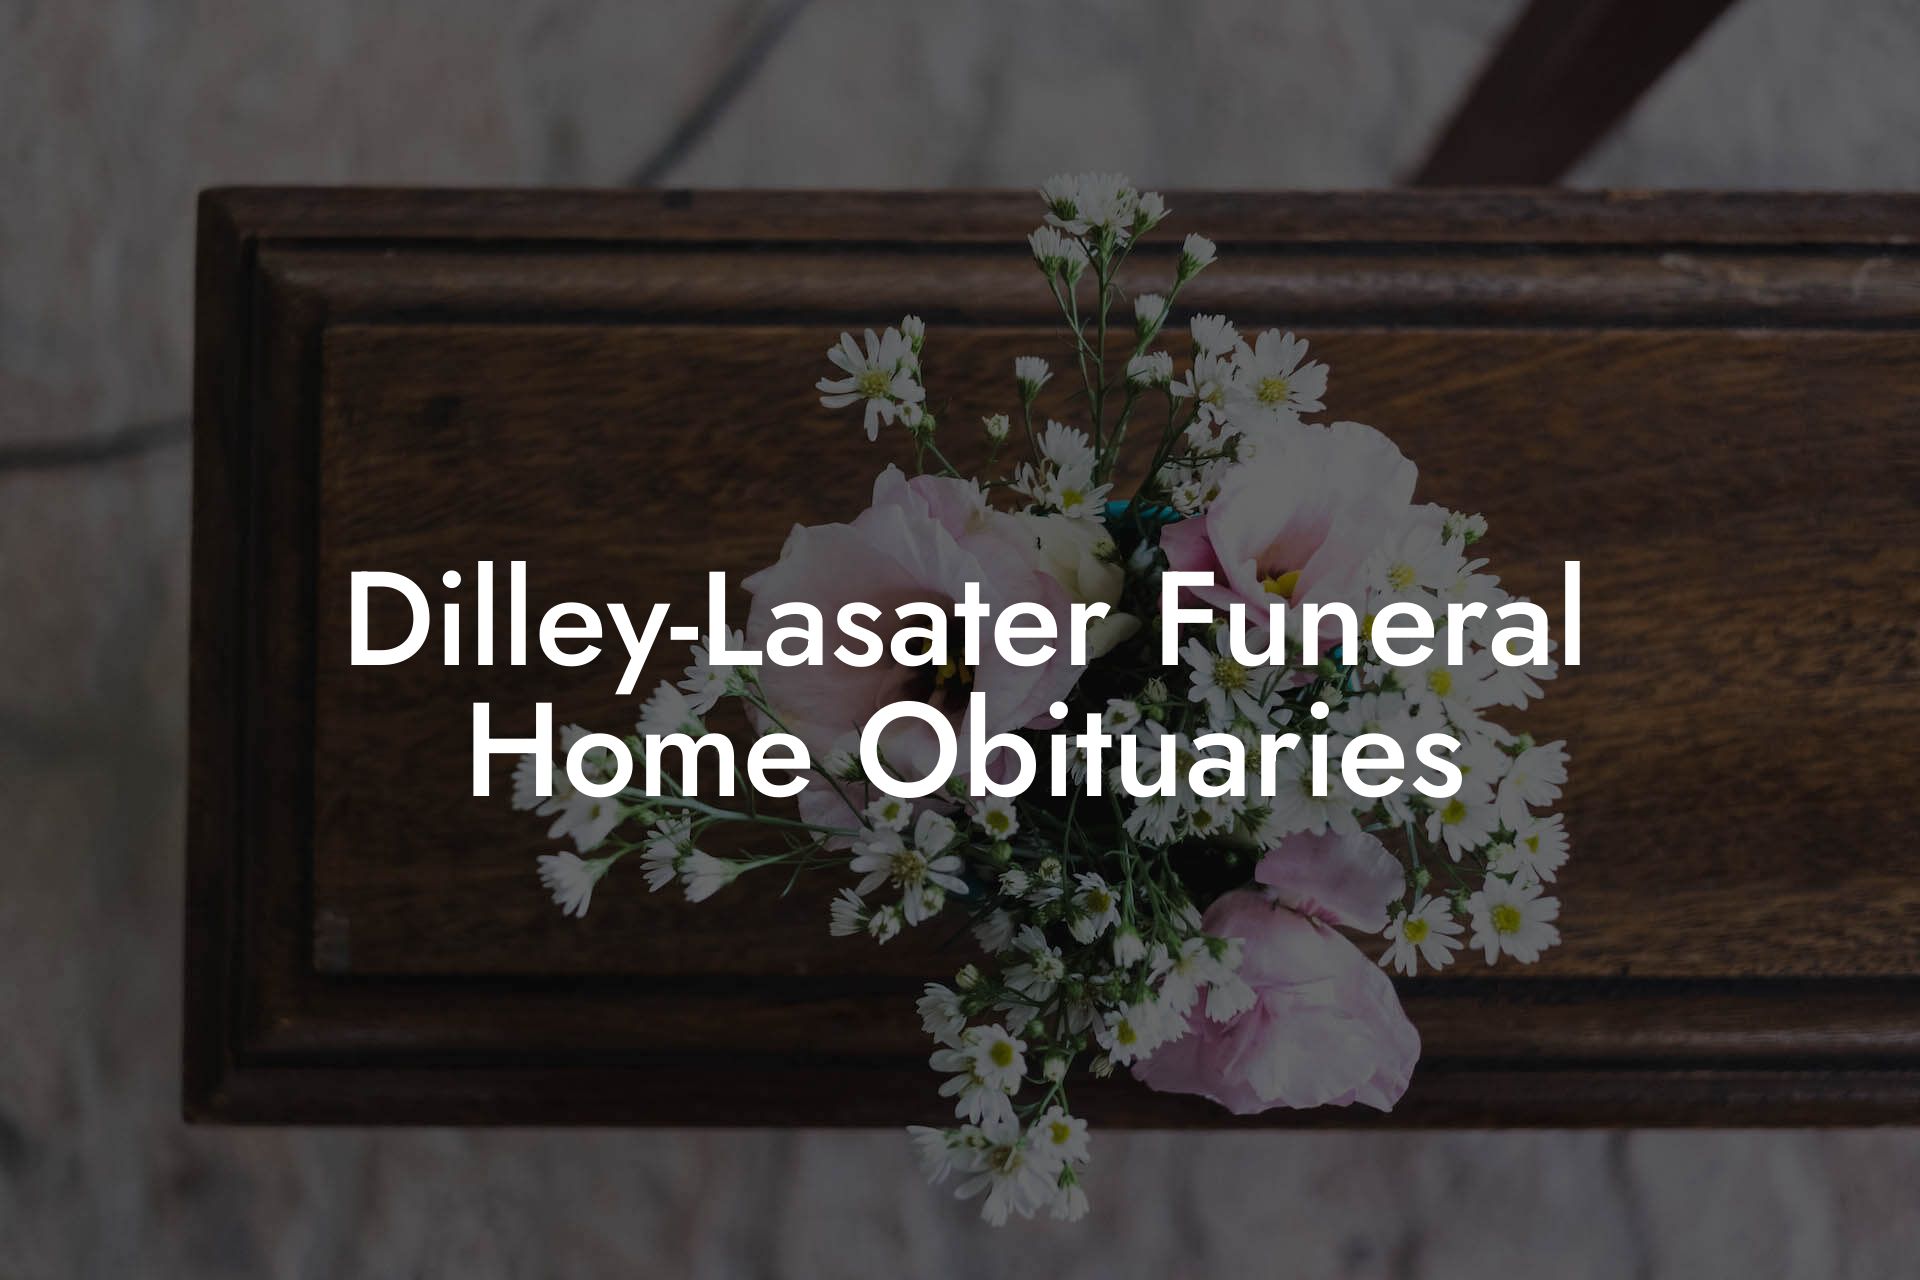 Dilley-Lasater Funeral Home Obituaries